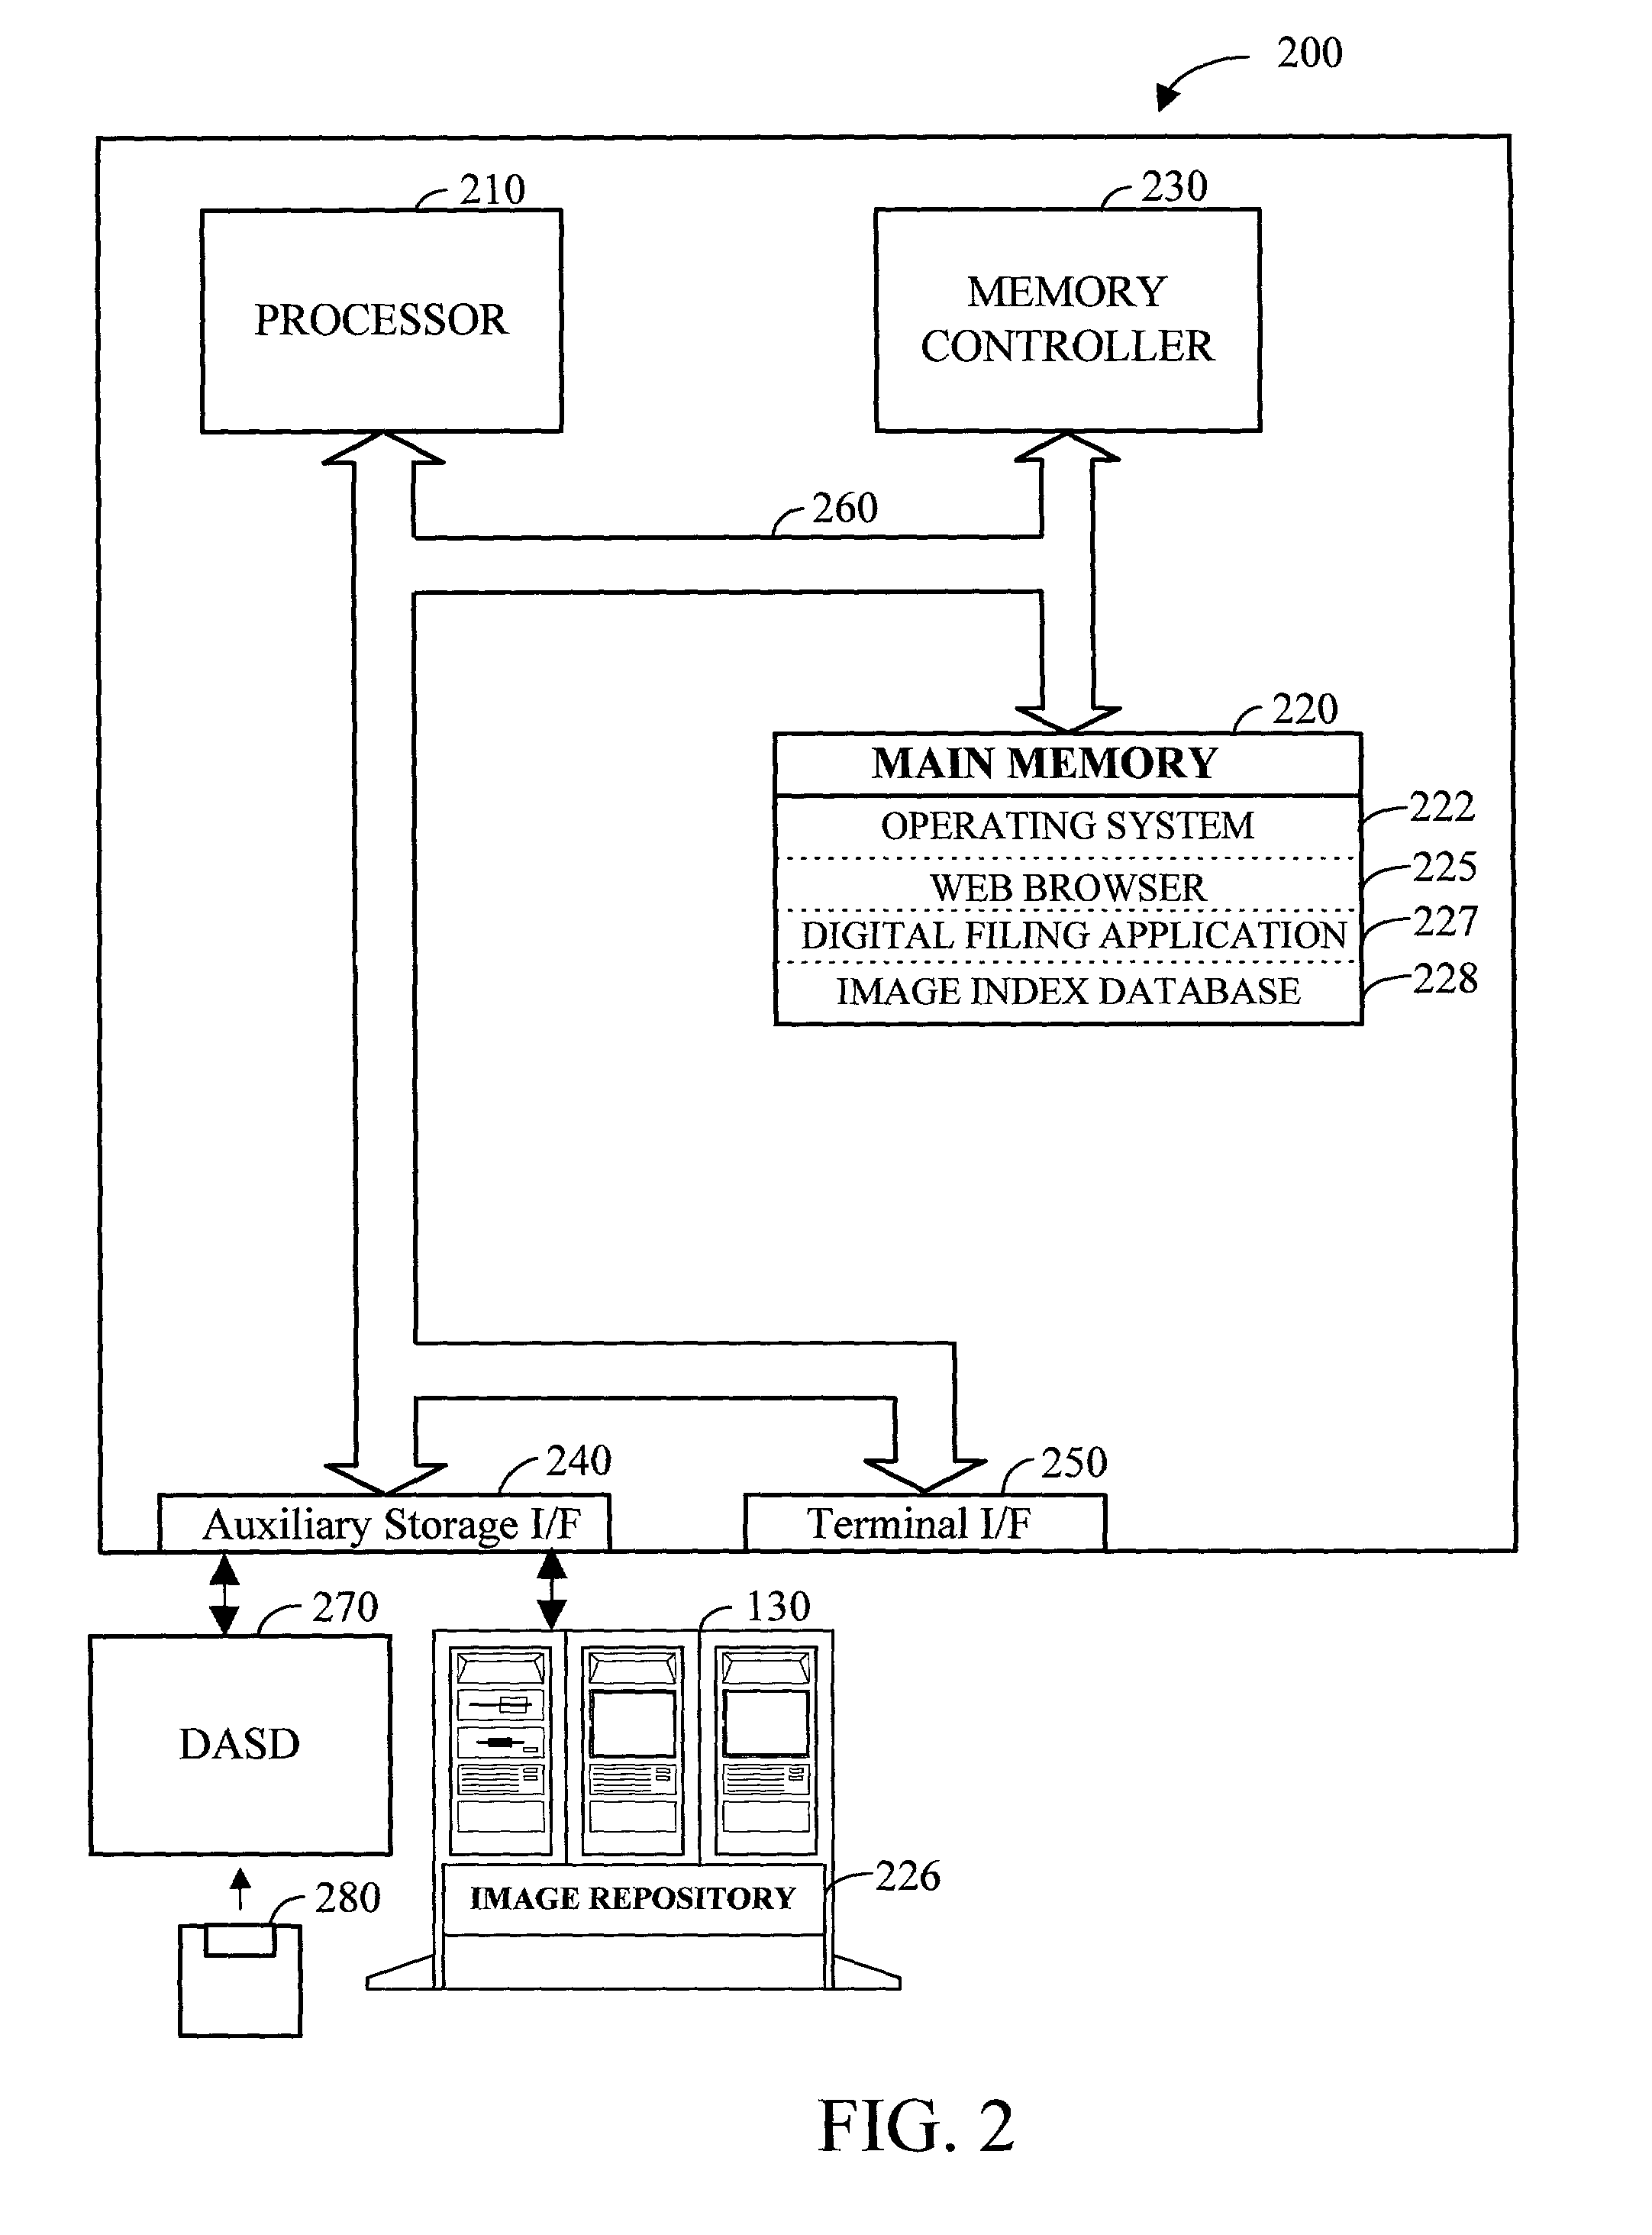 Apparatus and method for creating images of small documents